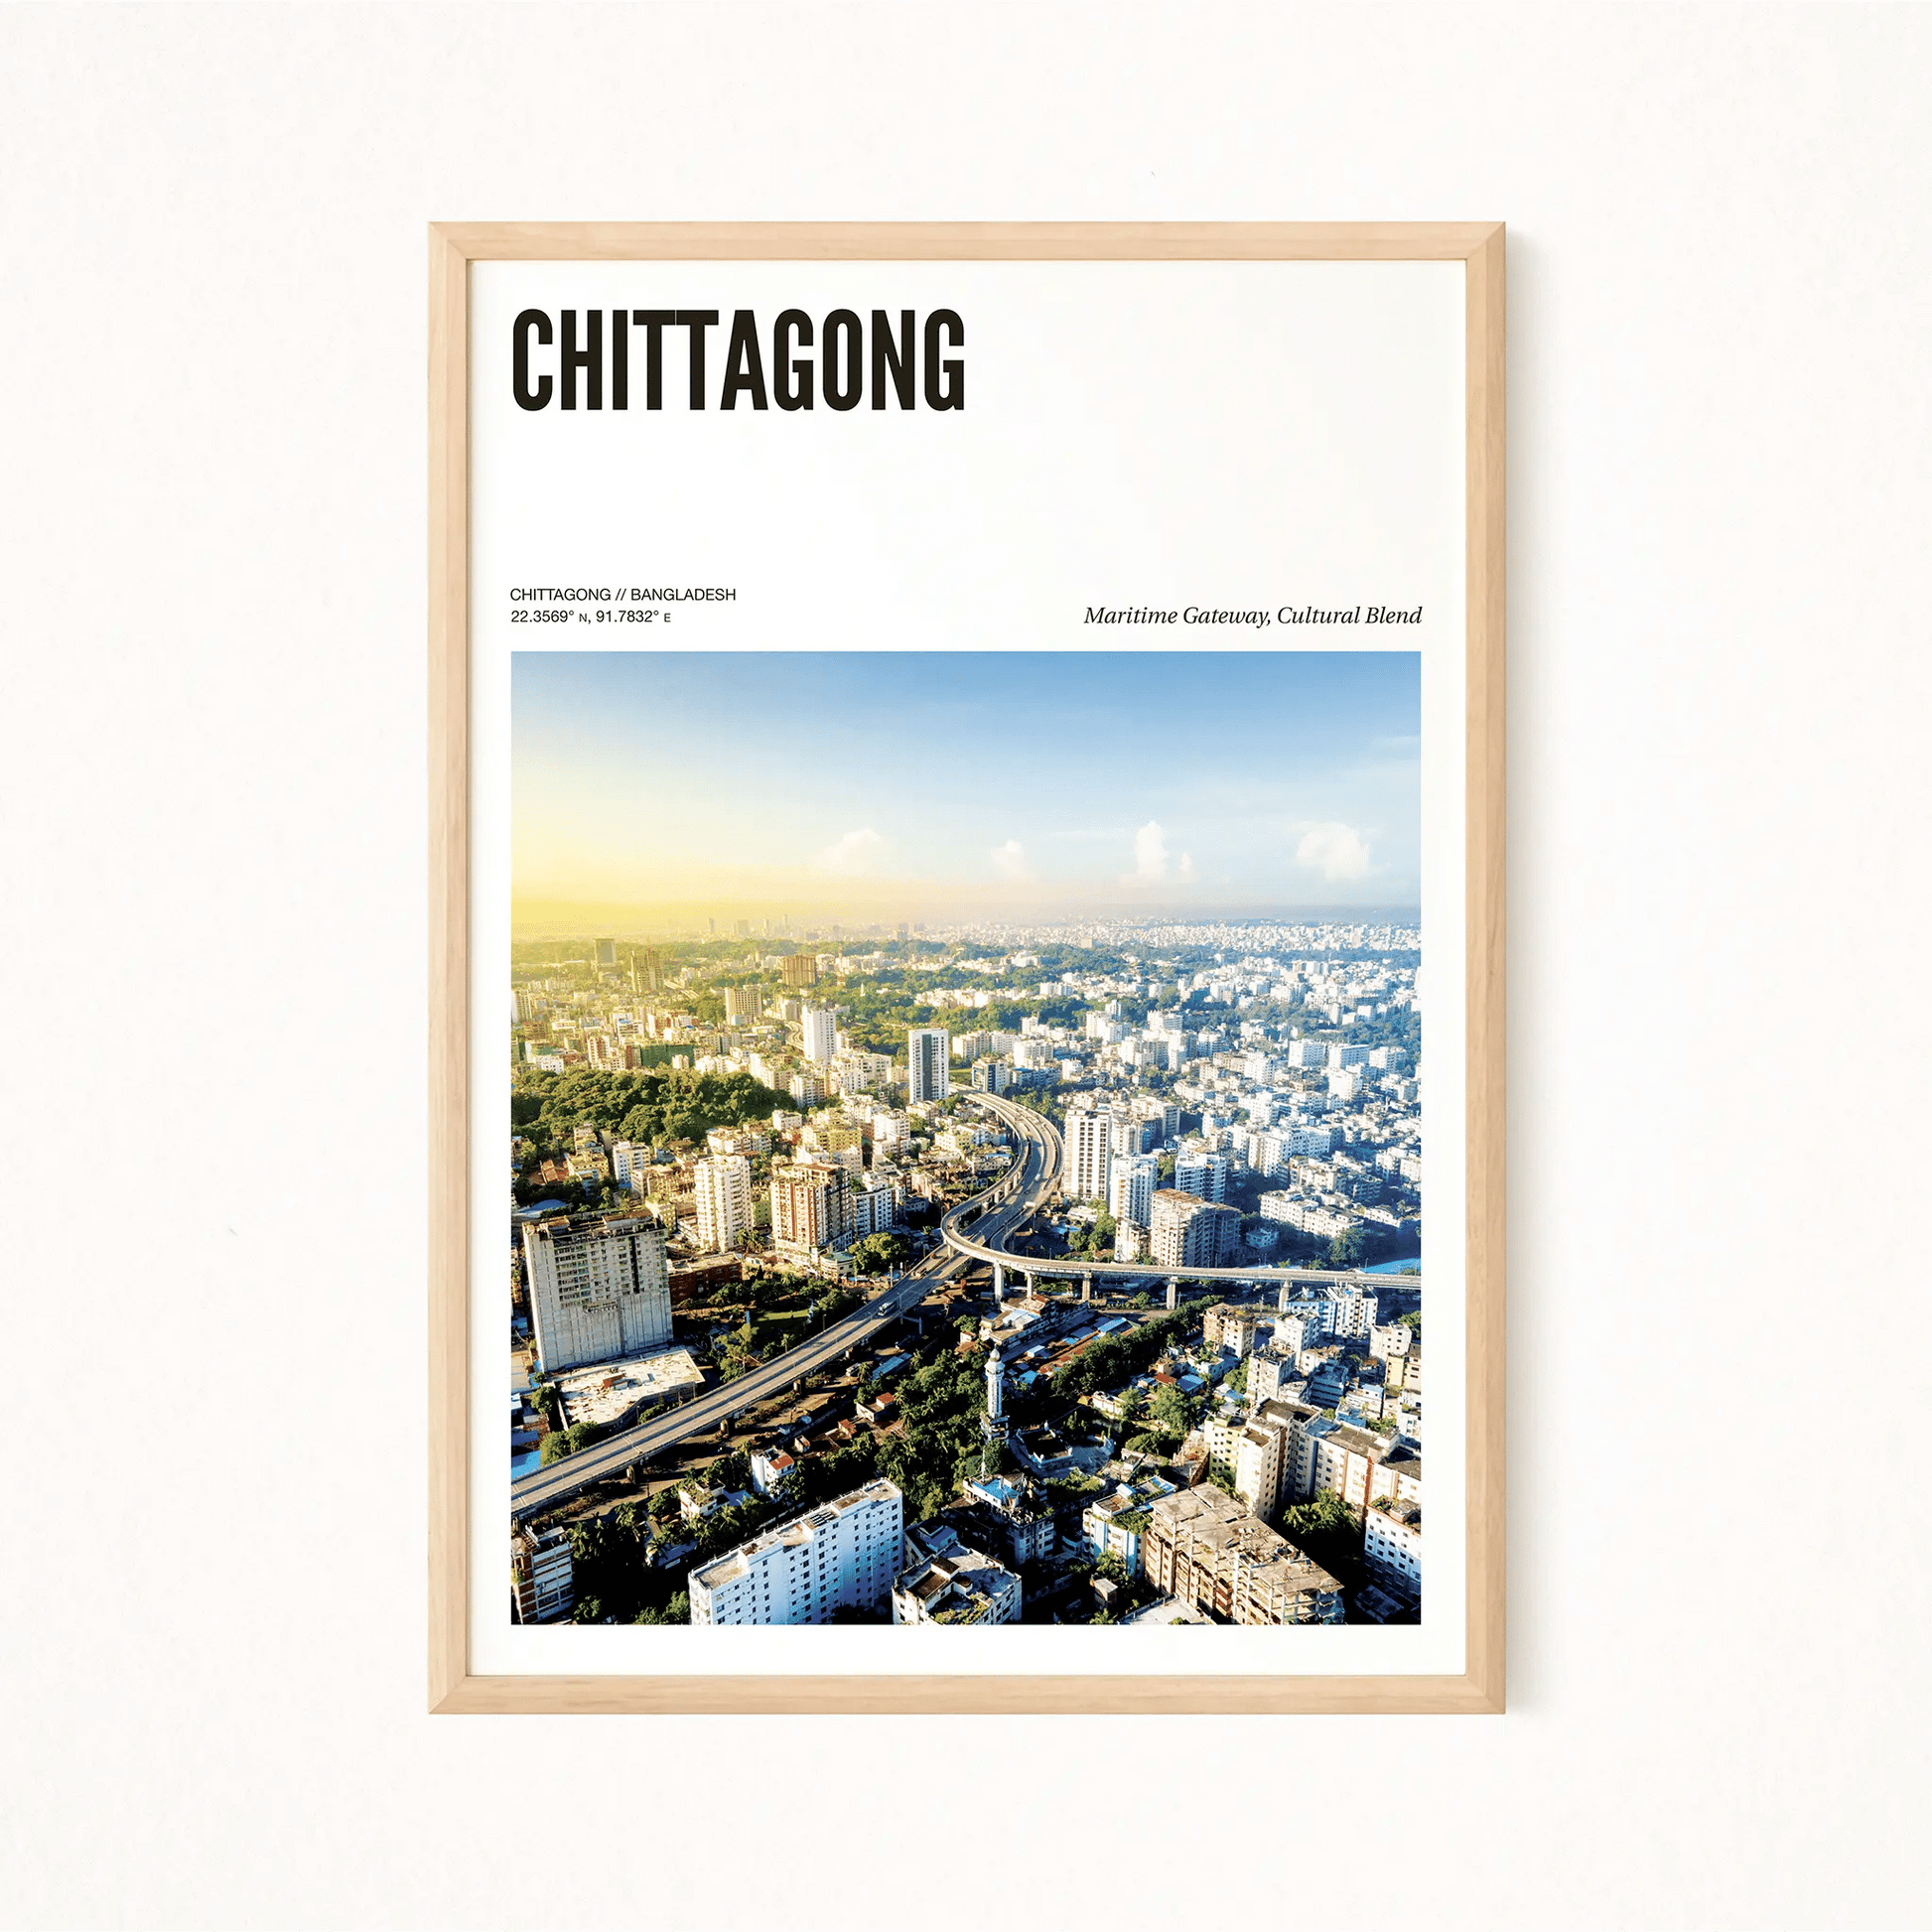 Chittagong Odyssey Poster - The Globe Gallery